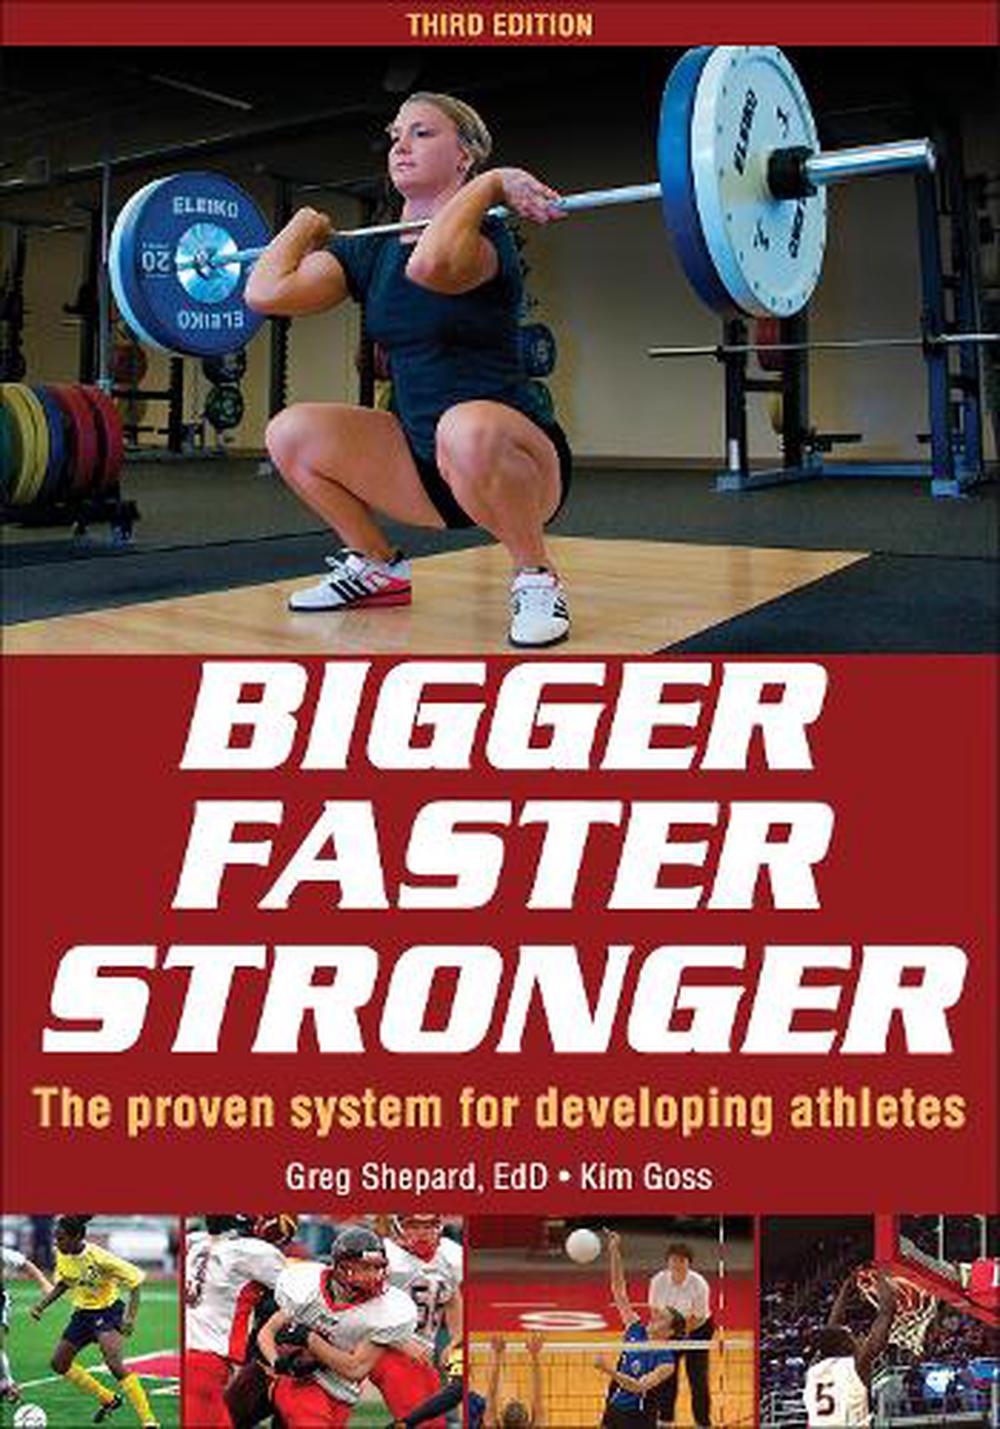 5 Day Bigger faster stronger workout book for Women